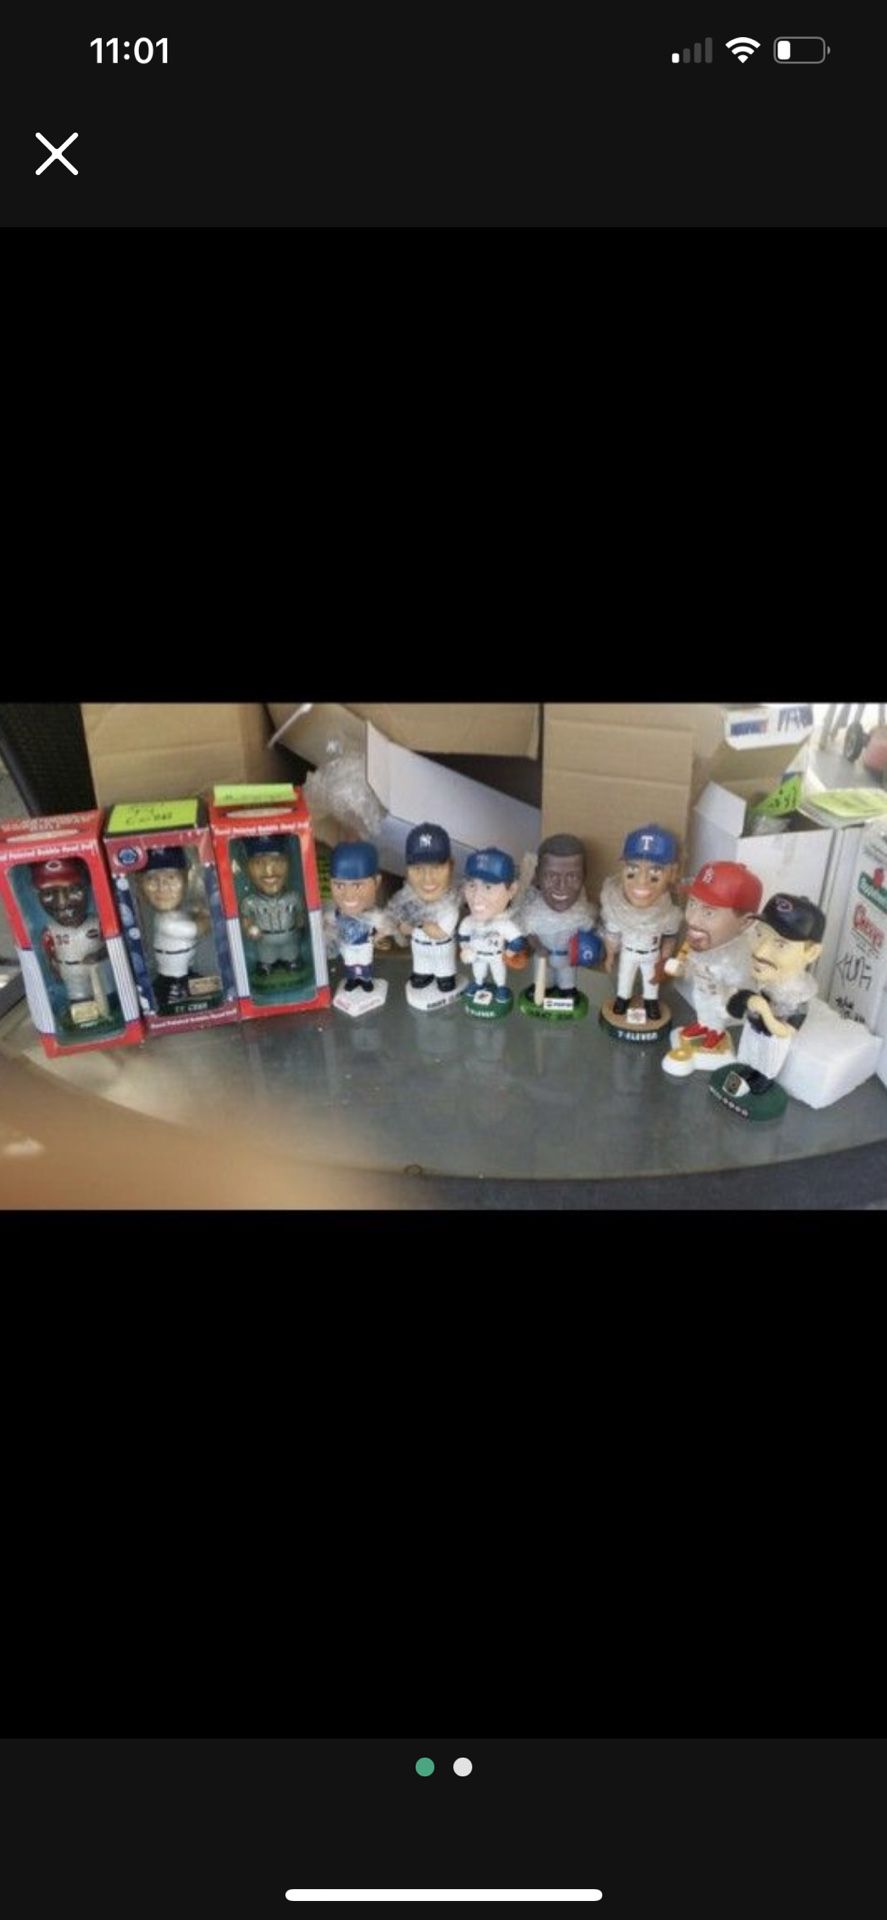 BOBBLEHEAD HALL OF FAME 